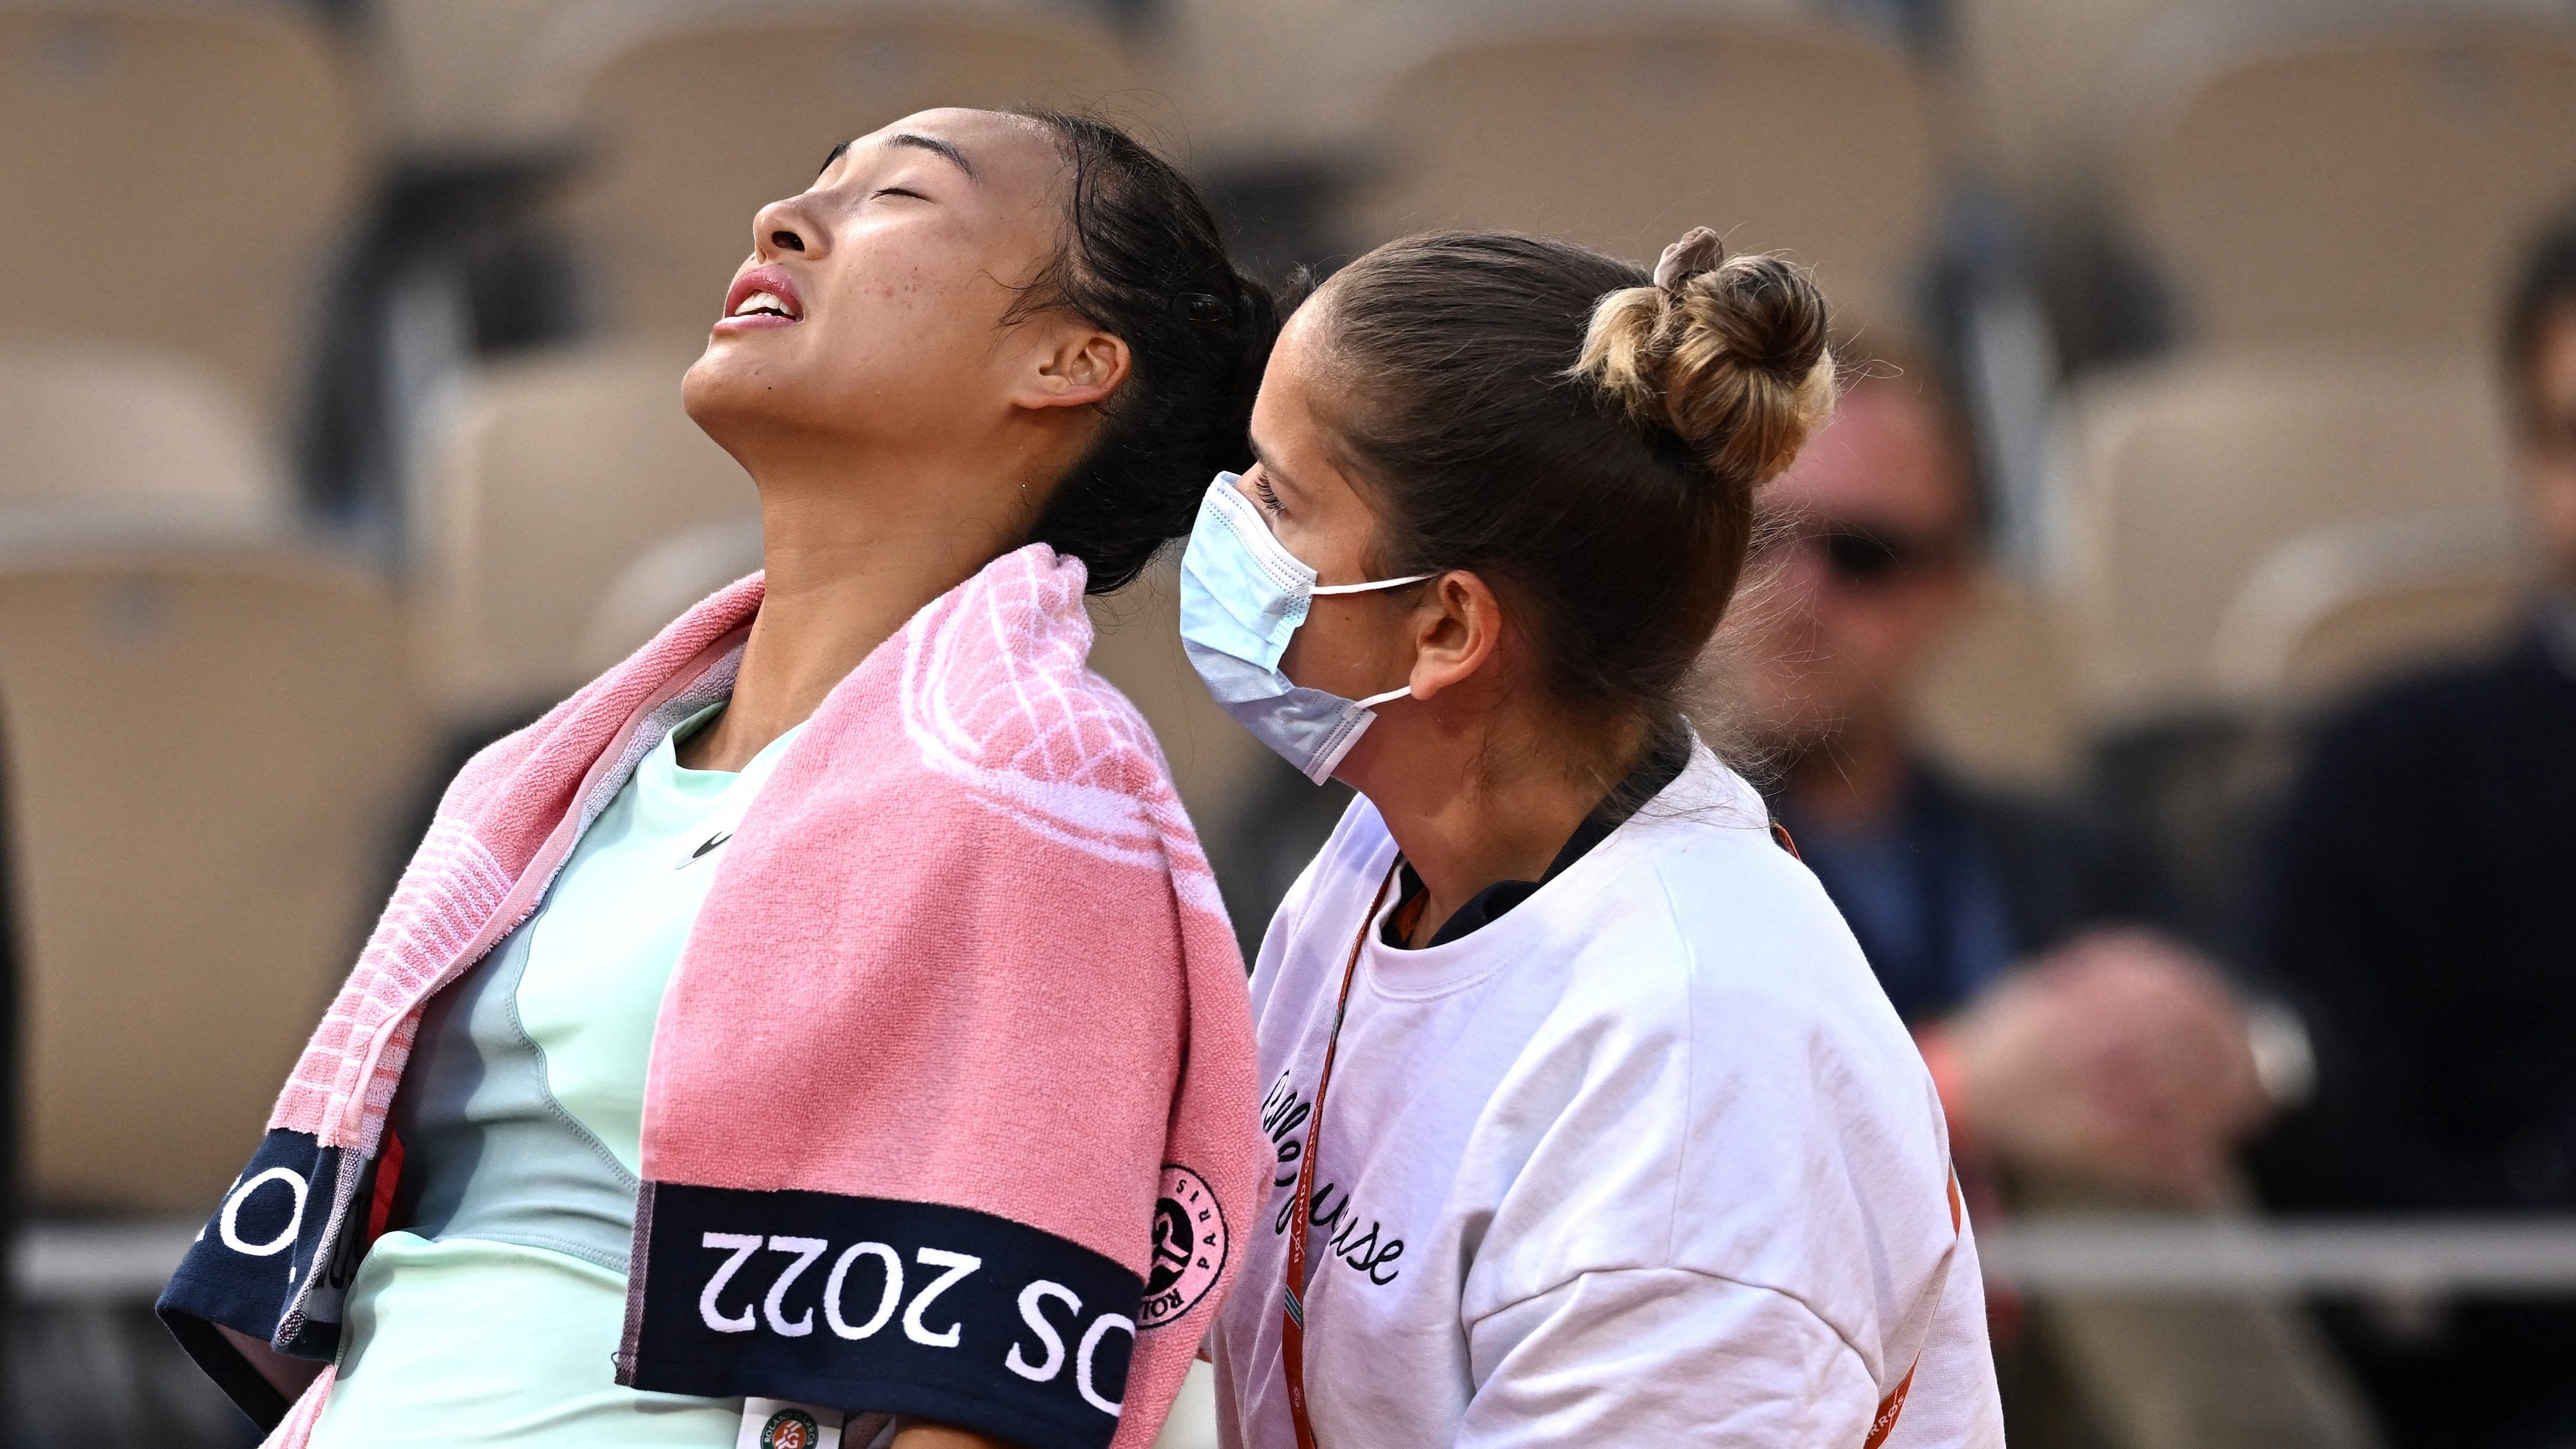 China’s Qinwen Zheng had to receive medical attention for menstrual cramps which were unbearable, she later said. Credit: Reuters Photo